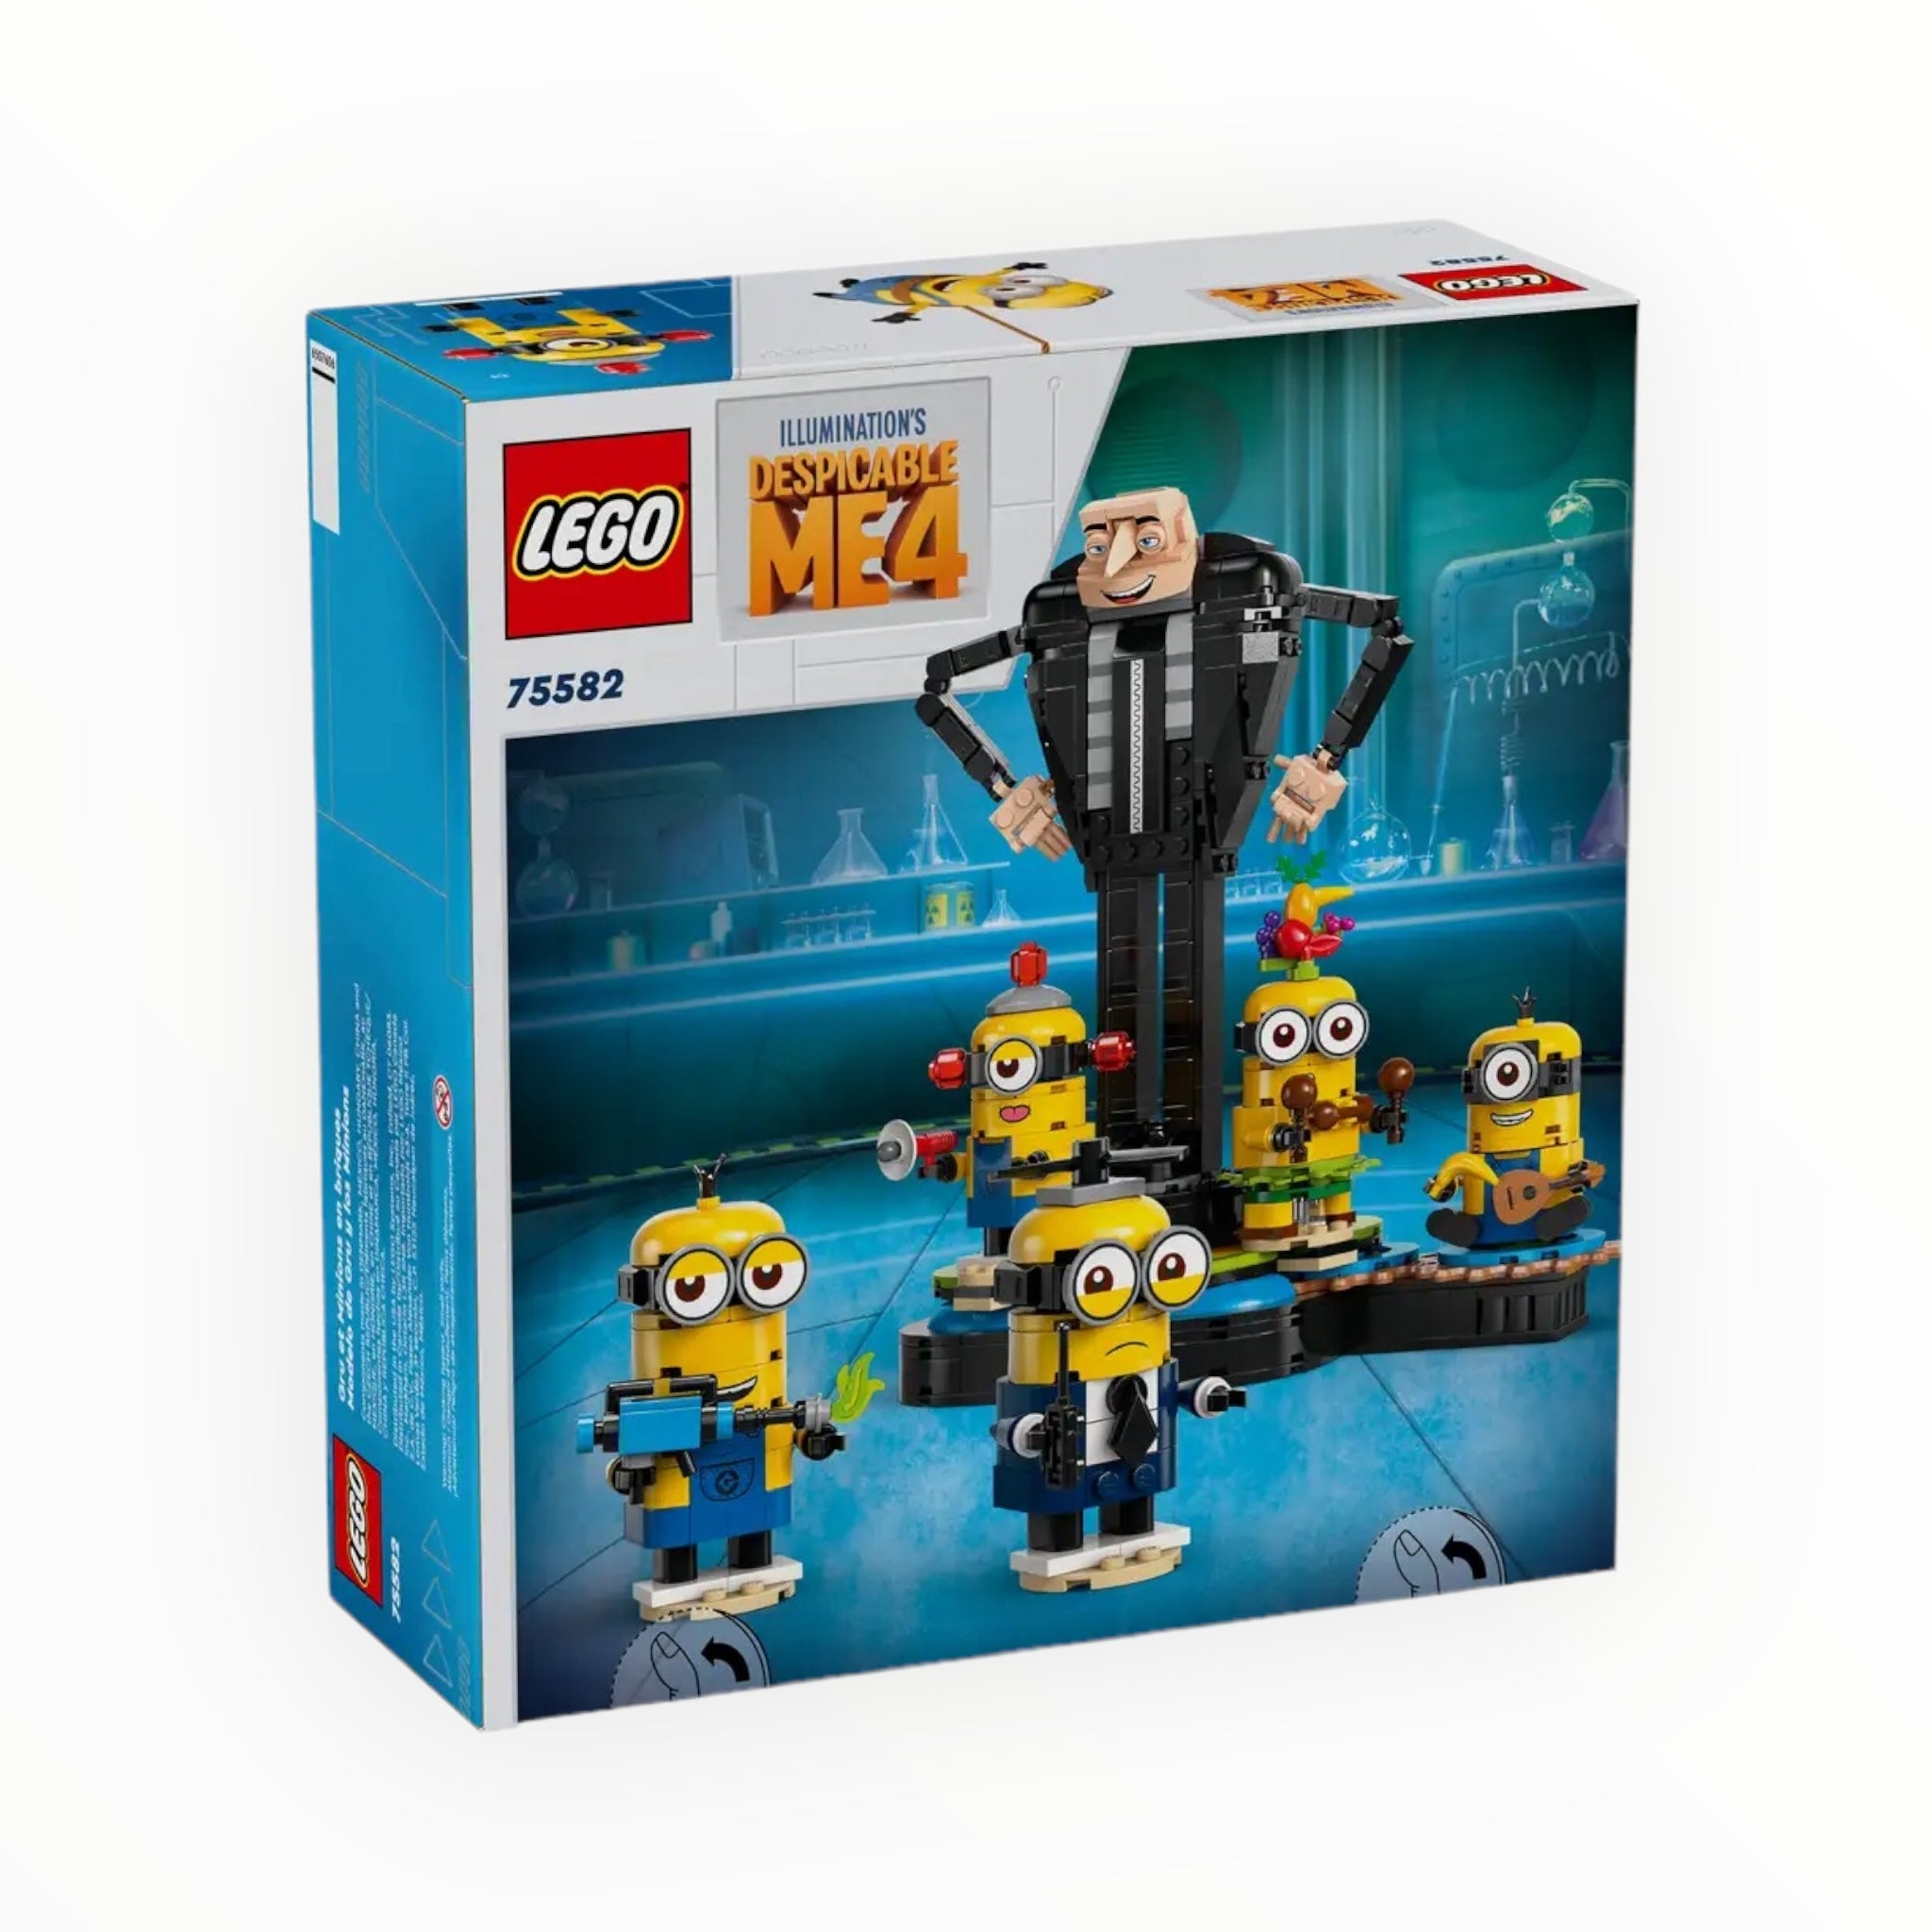 75582 Despicable Me 4 Brick-Built Gru and Minions